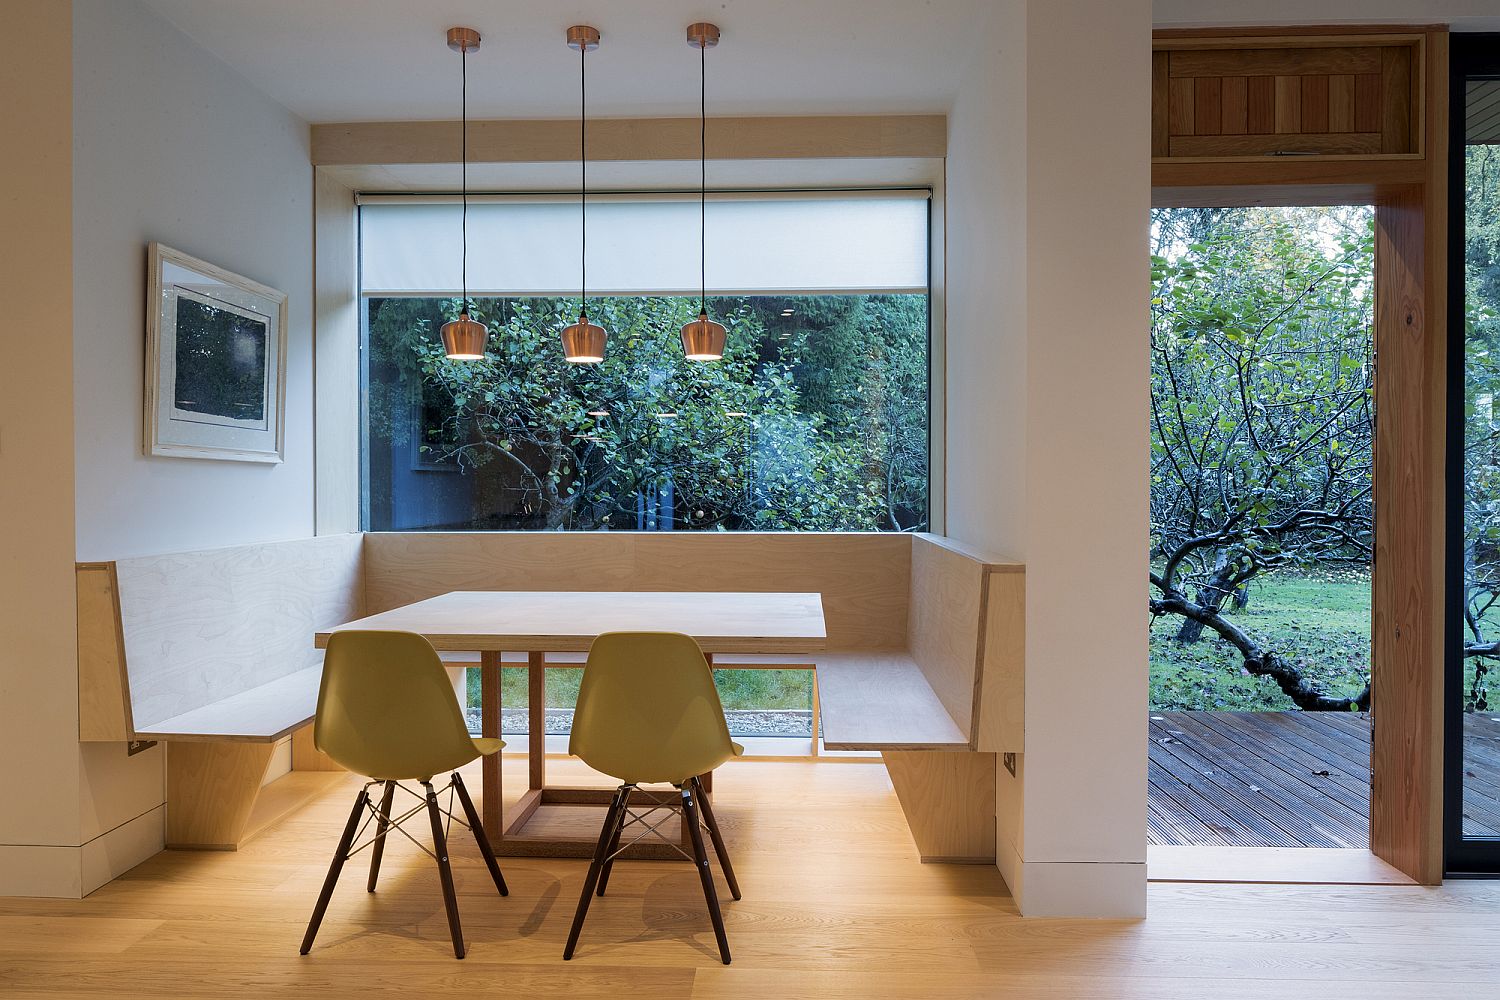 Floor-to-ceiling-glass-window-brings-light-into-the-banquette-styled-dining-area